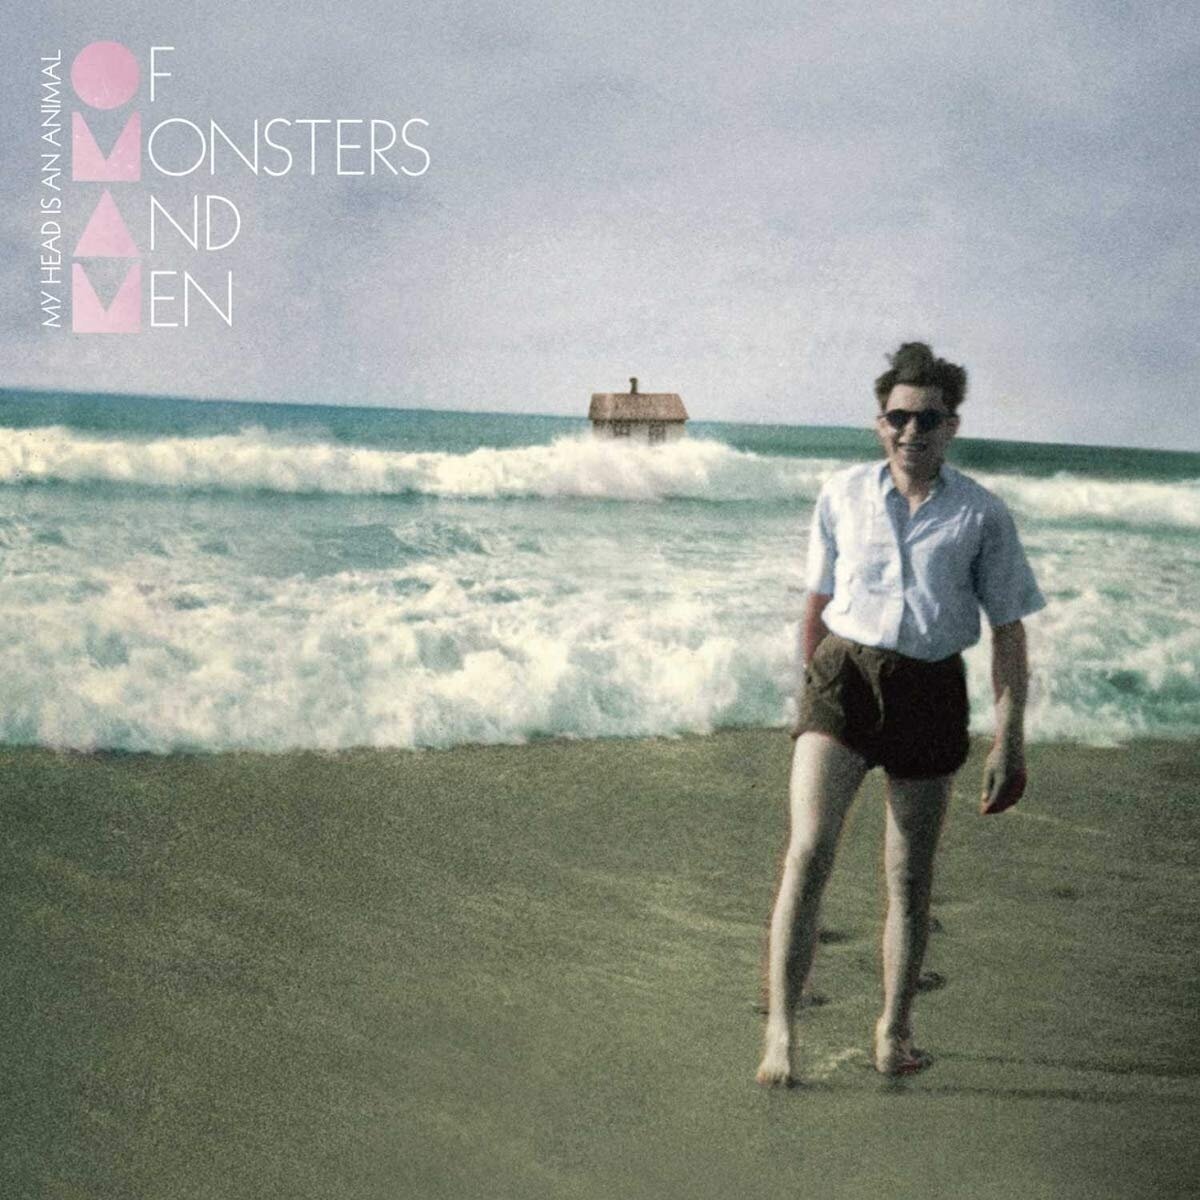 Vinyl Record Of Monsters and Men - My Head Is An Animal (2 LP)